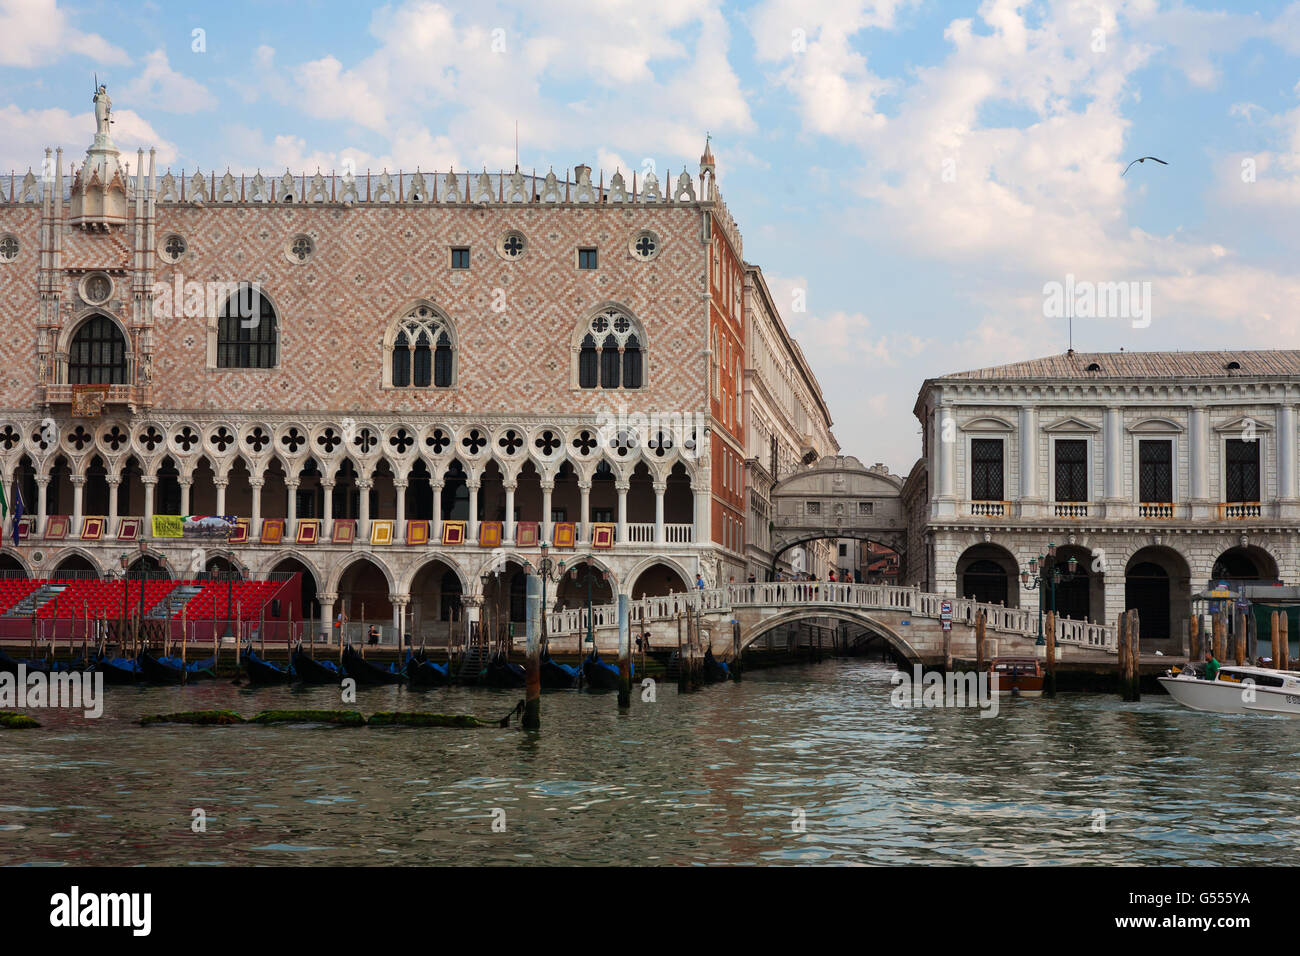 The Doge's Palace and the Bridge of Sighs from the Bacino di San Marco, Venice, Italy Stock Photo